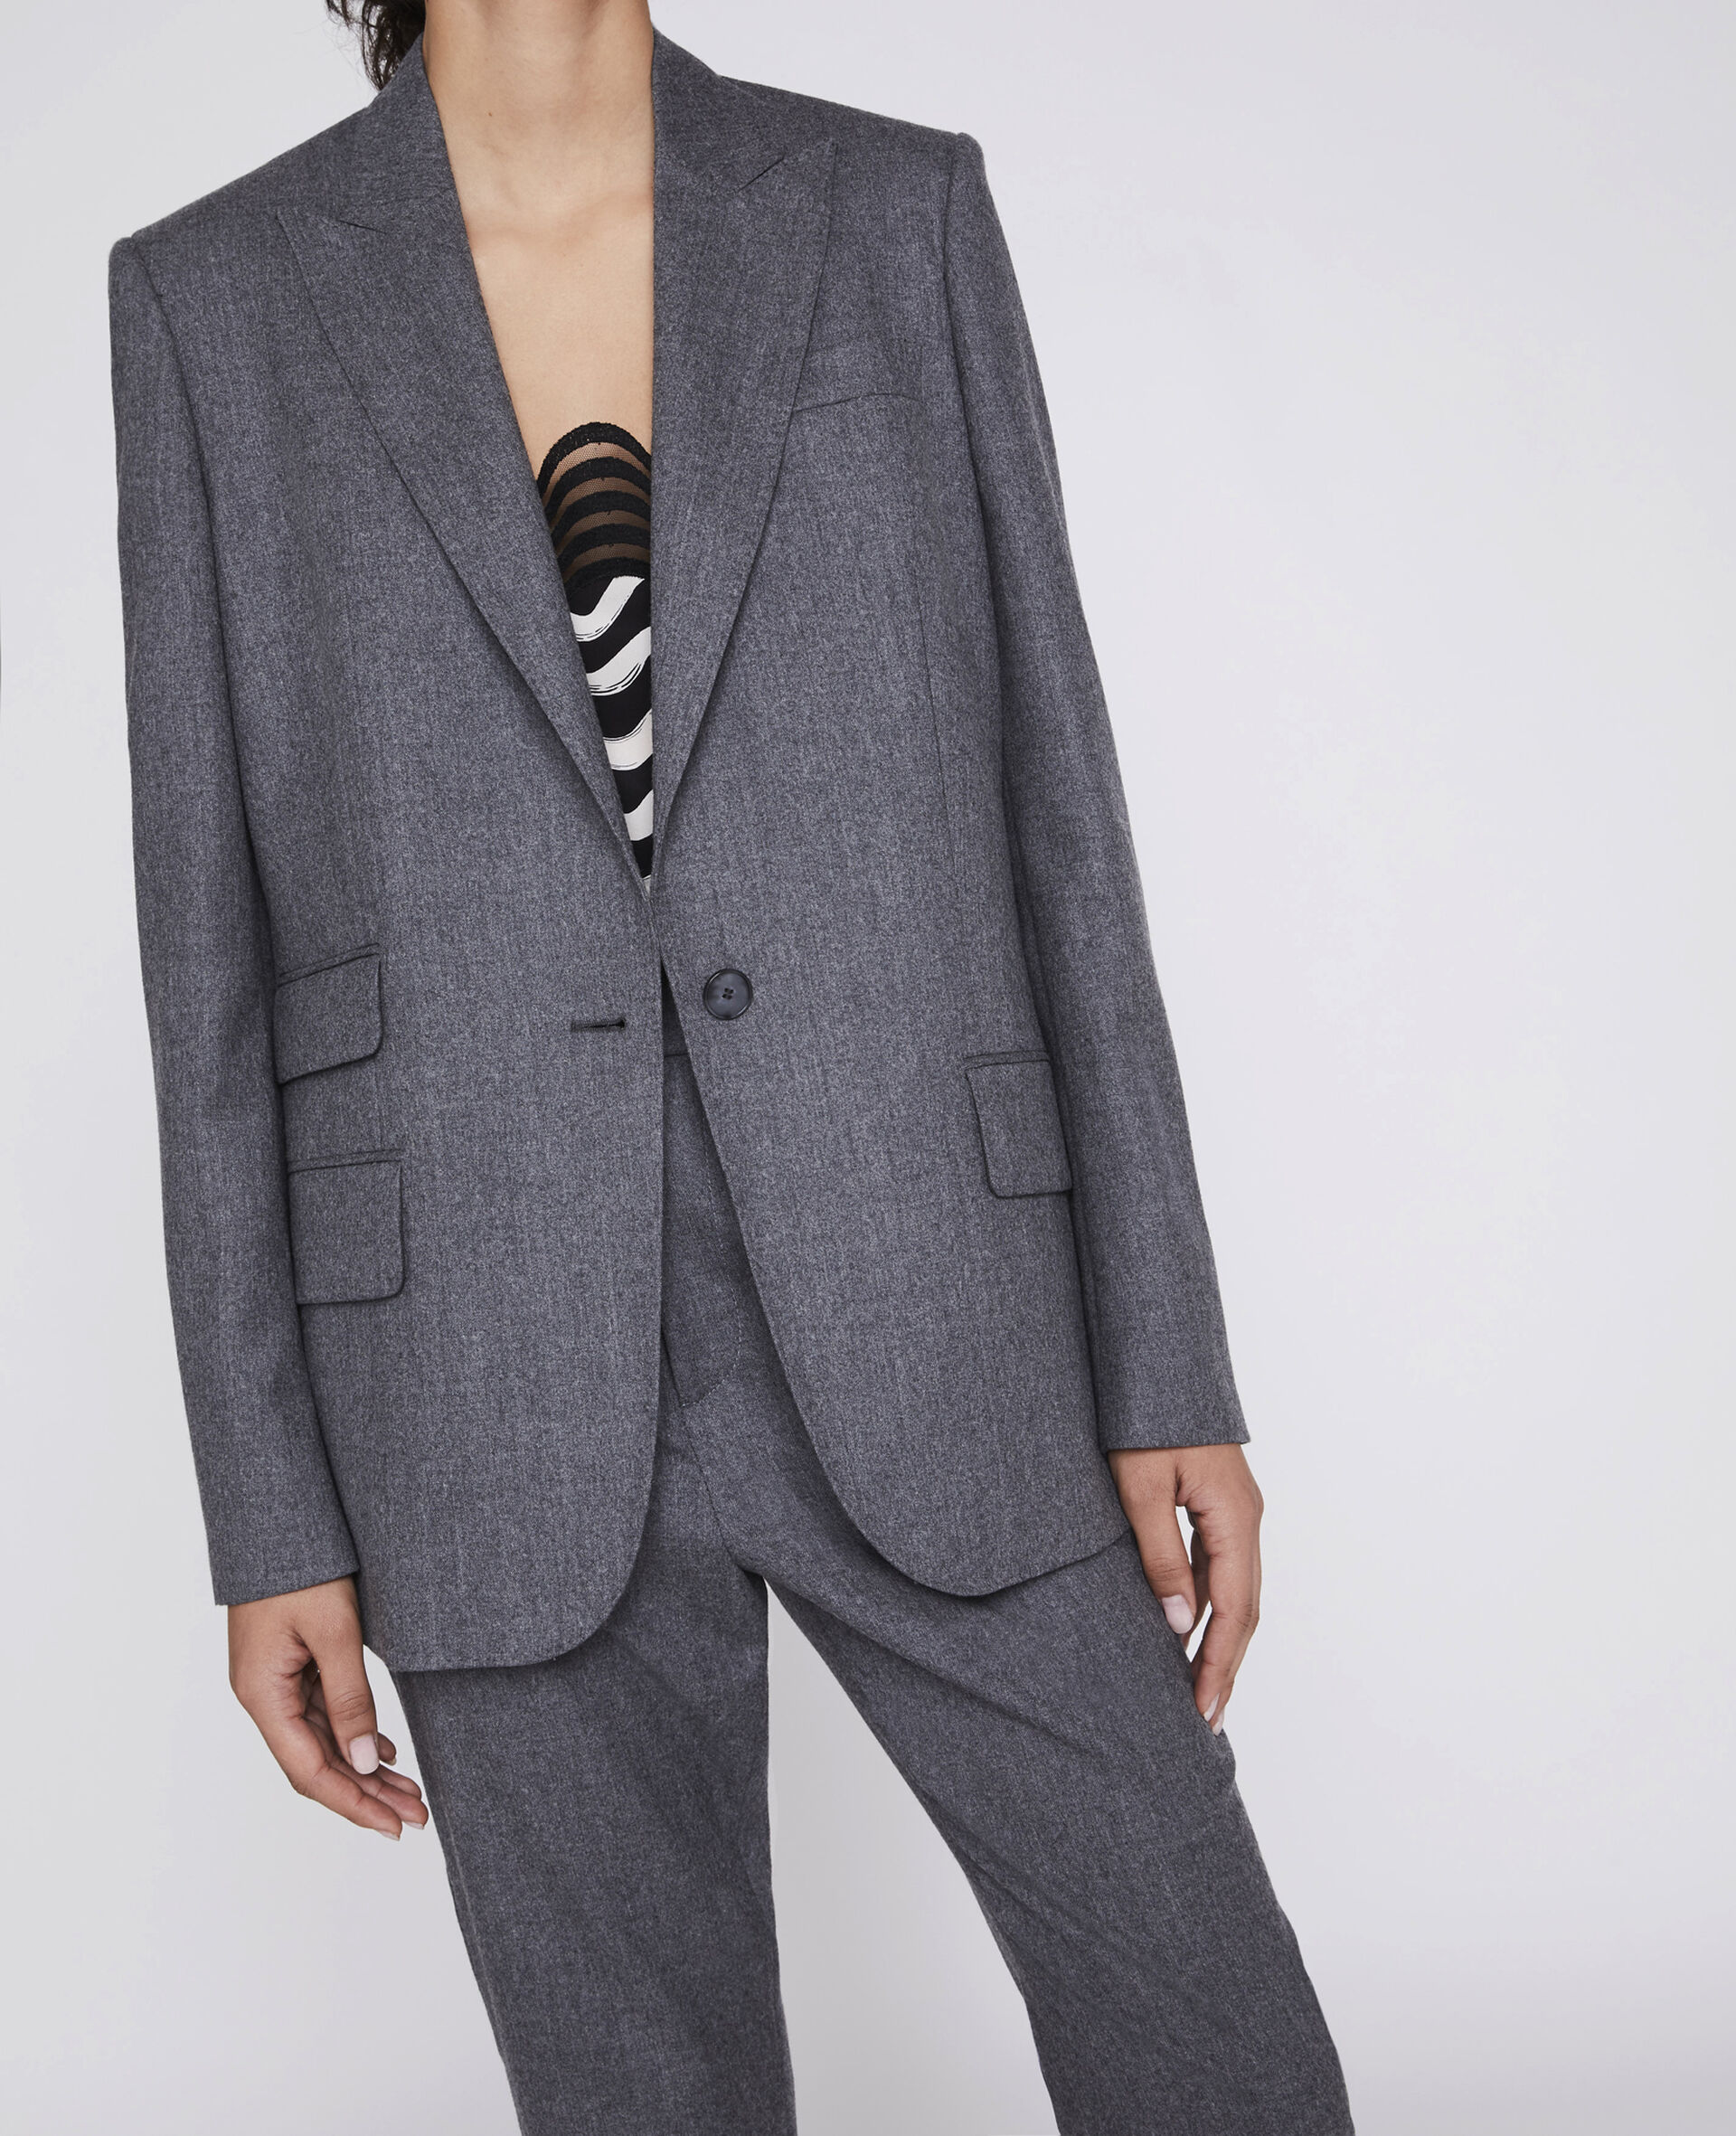 Tailored Bell Jacket -Grey-large image number 3